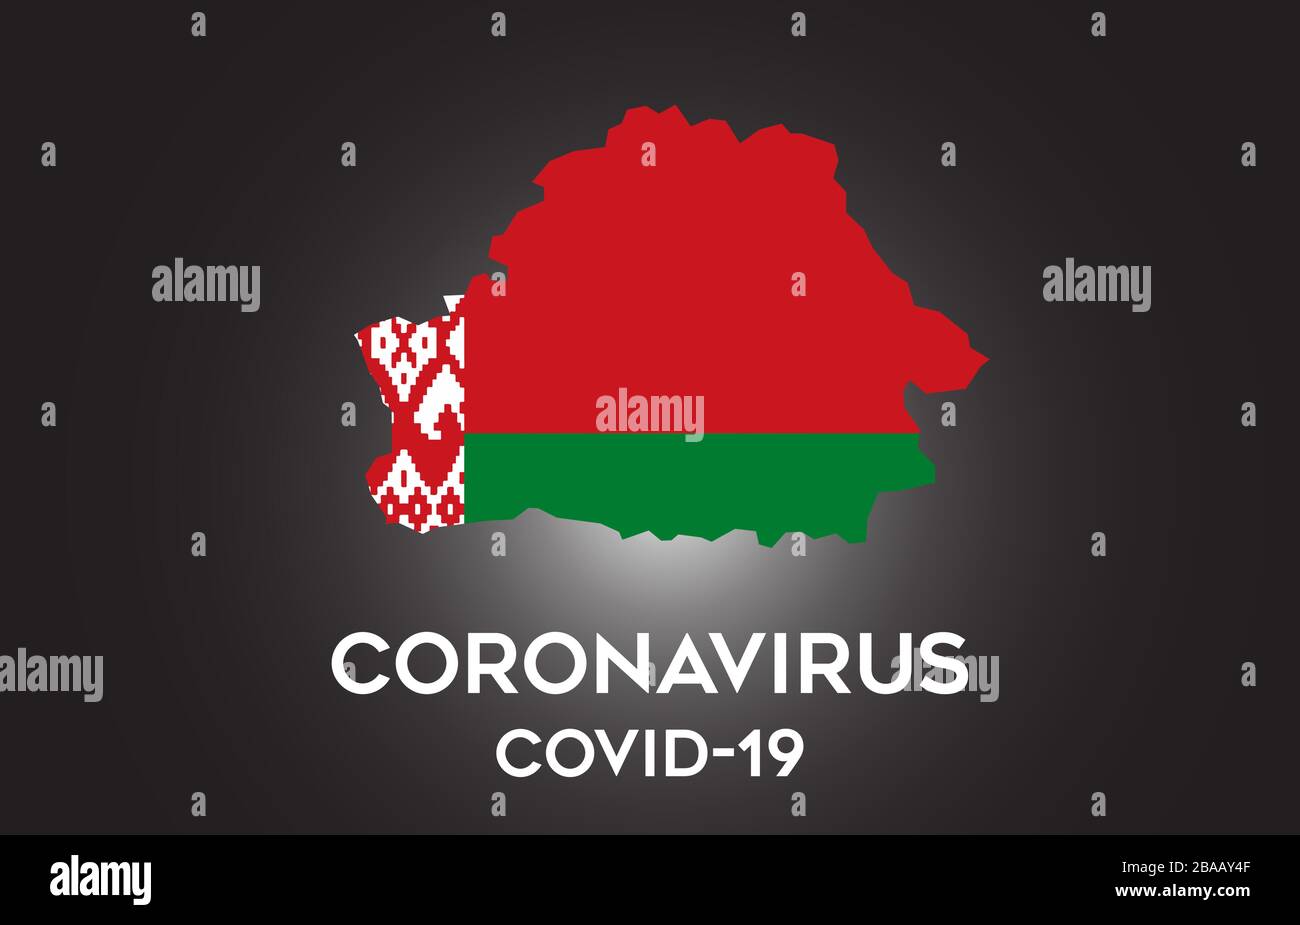 CoronaVirus in Belarus and Country flag inside Country border Map Vector Design. Covid-19 with Belarus map with national flag Vector Illustration. Stock Vector